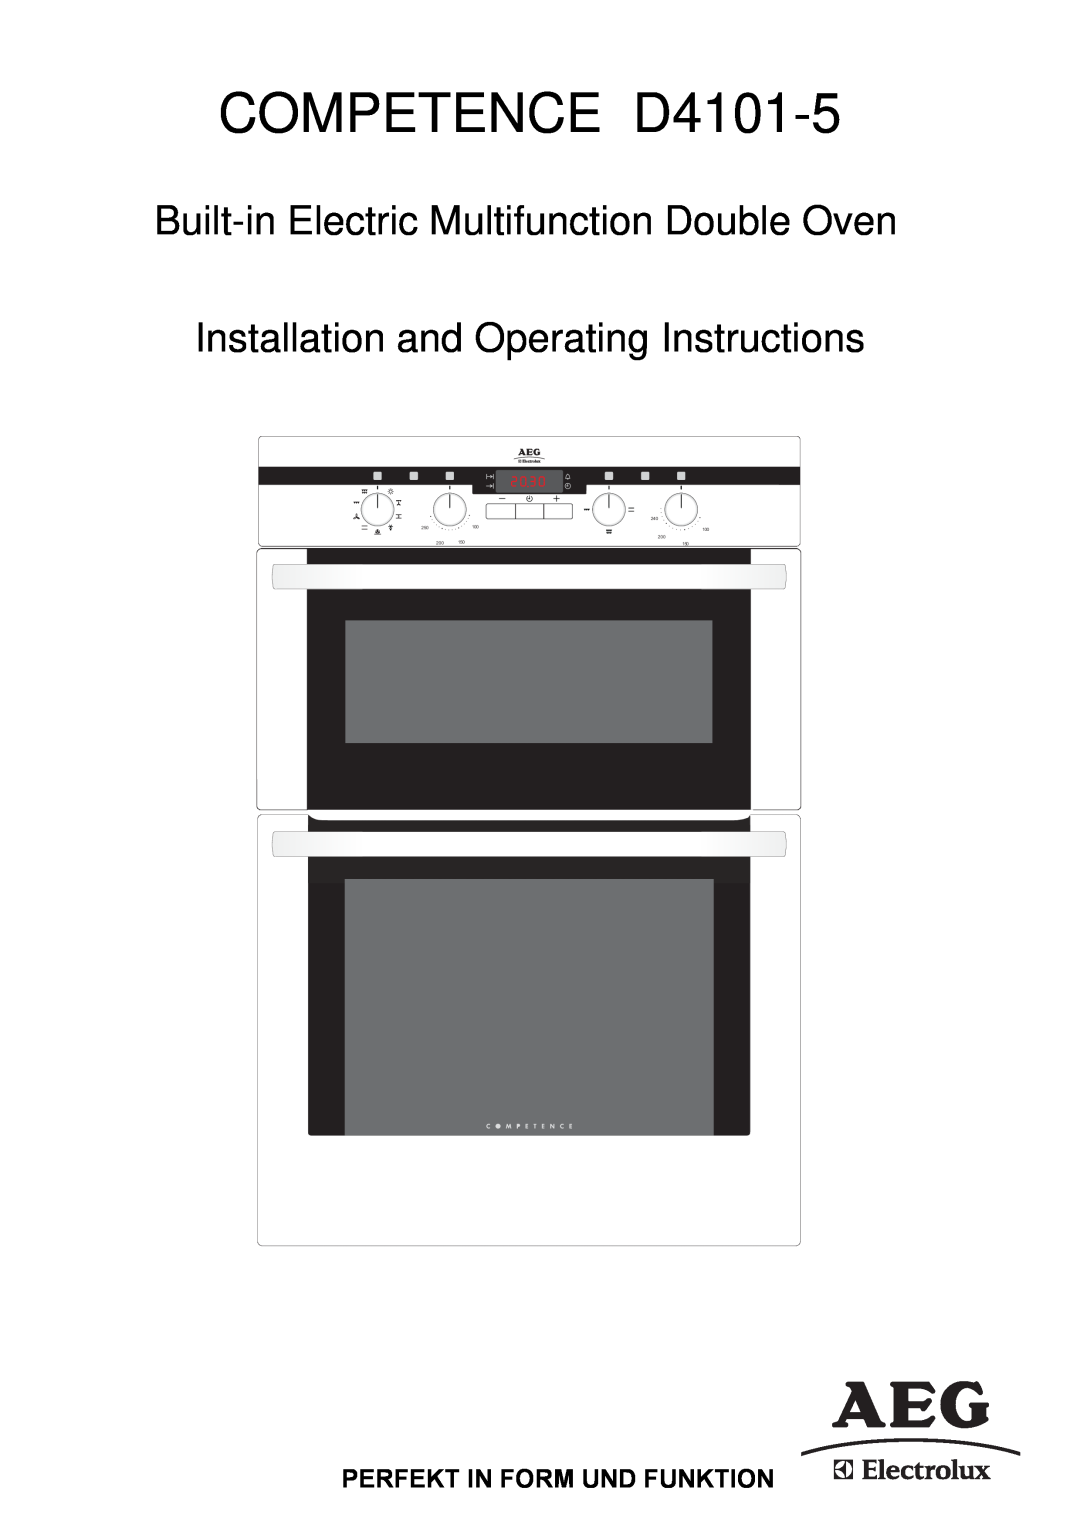 Electrolux manual Perfekt In Form Und Funktion, COMPETENCE D4101-5, Built-in Electric Multifunction Double Oven 